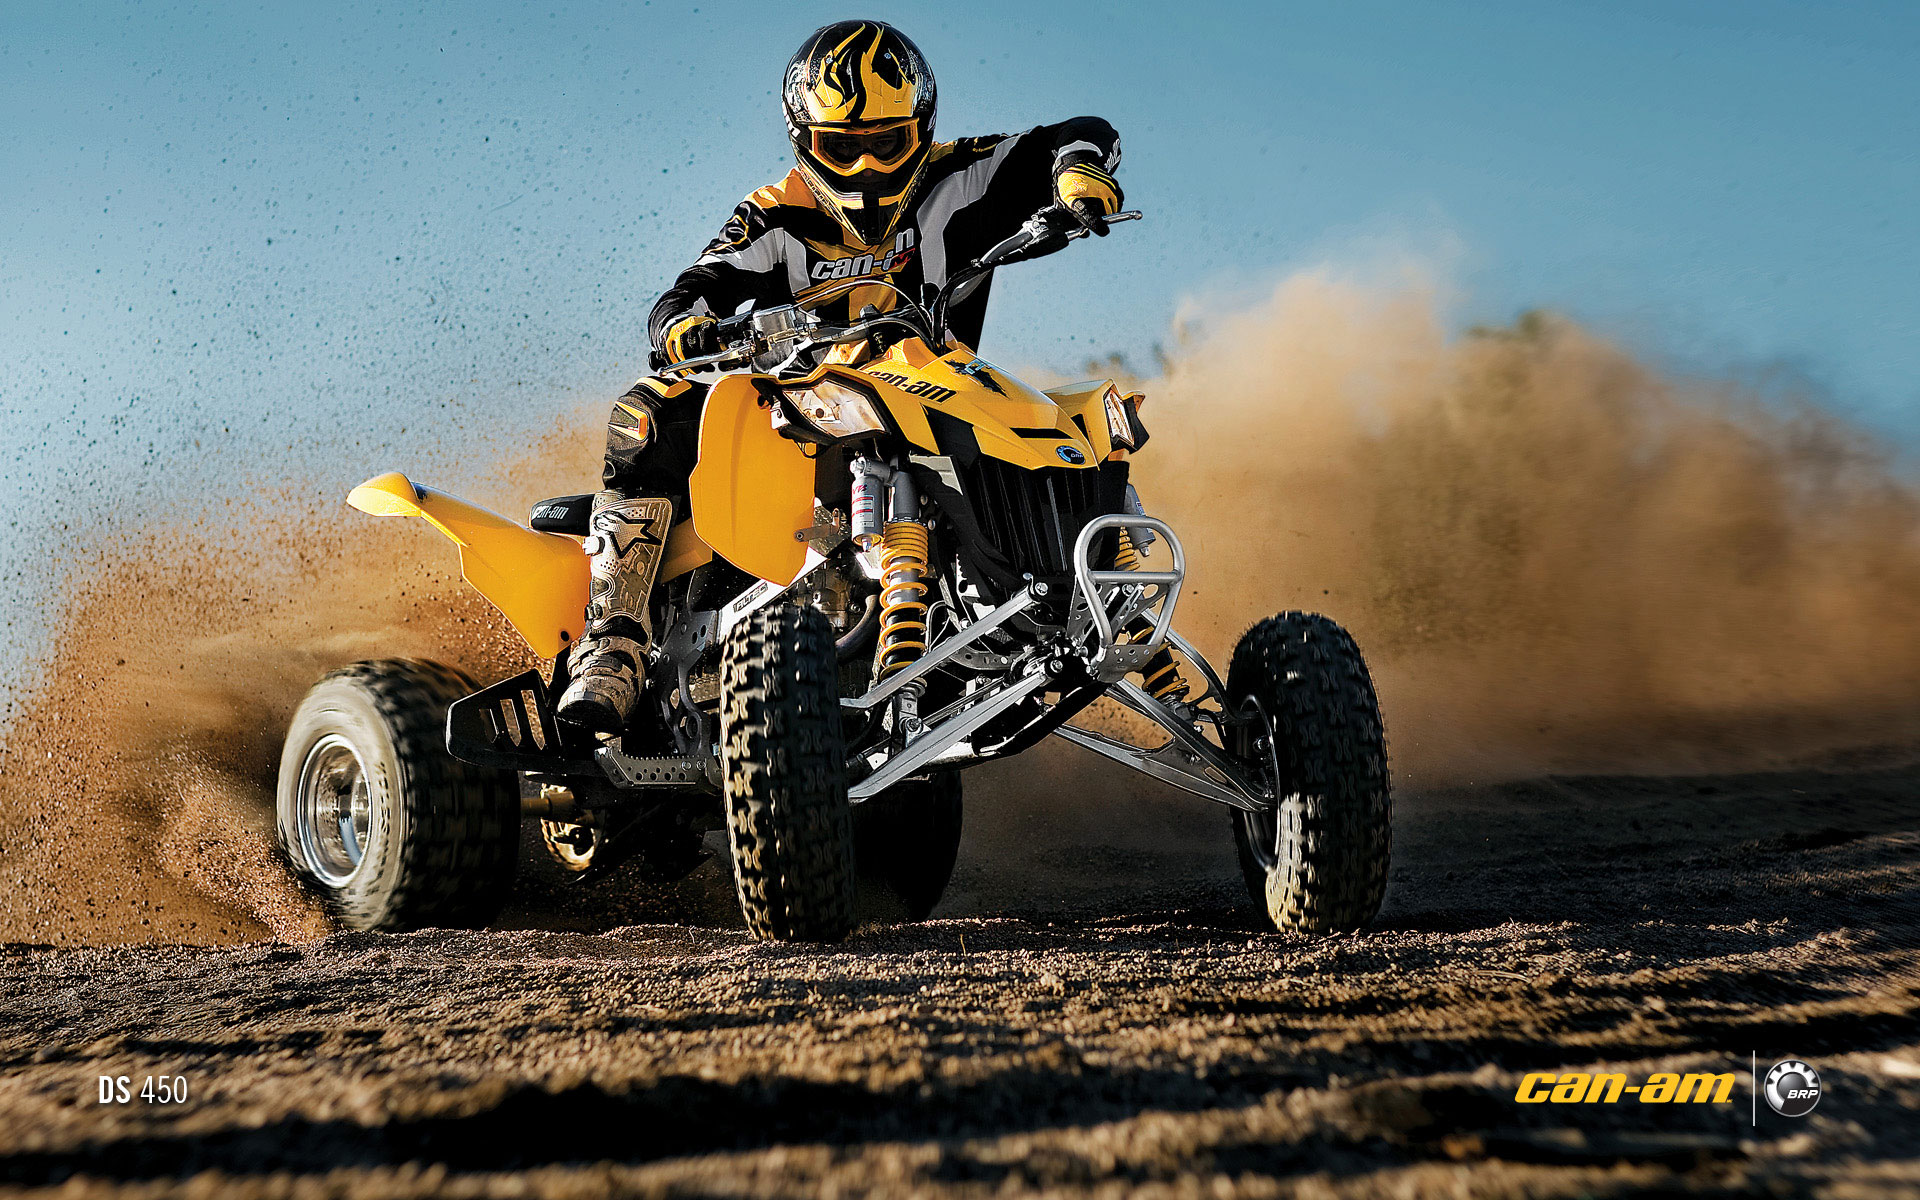 can am, Ds, 450, Atv, Quad, Offroad, Motorbike, Bike, Dirtbike, Poster Wall...